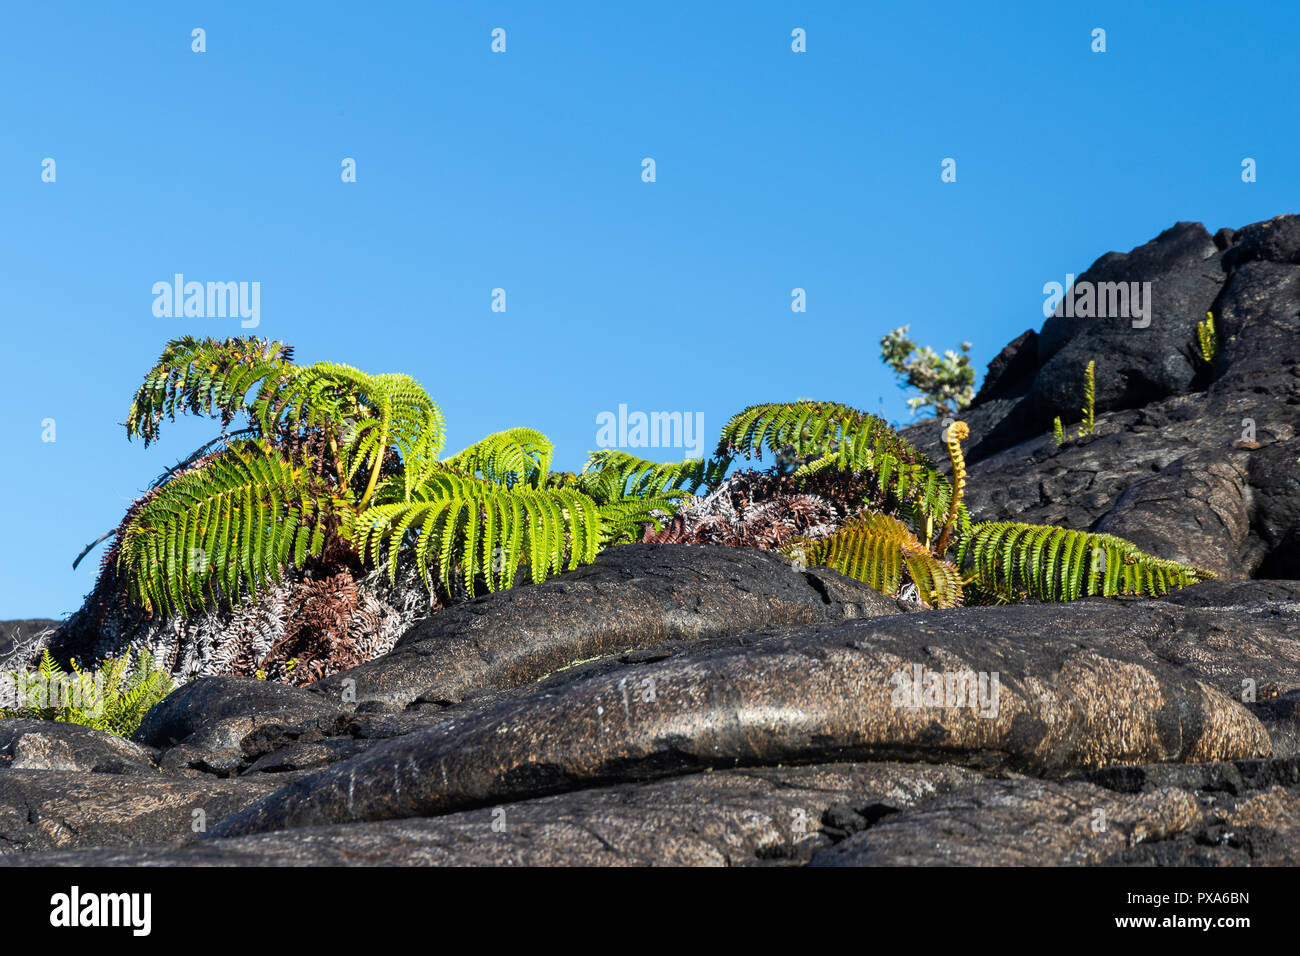 Pair of green ferns growing out of dark pahoehoe lava. Blue sky is in the background. Near Chain of Craters Road in Volcano National Park, Hawaii. Stock Photo